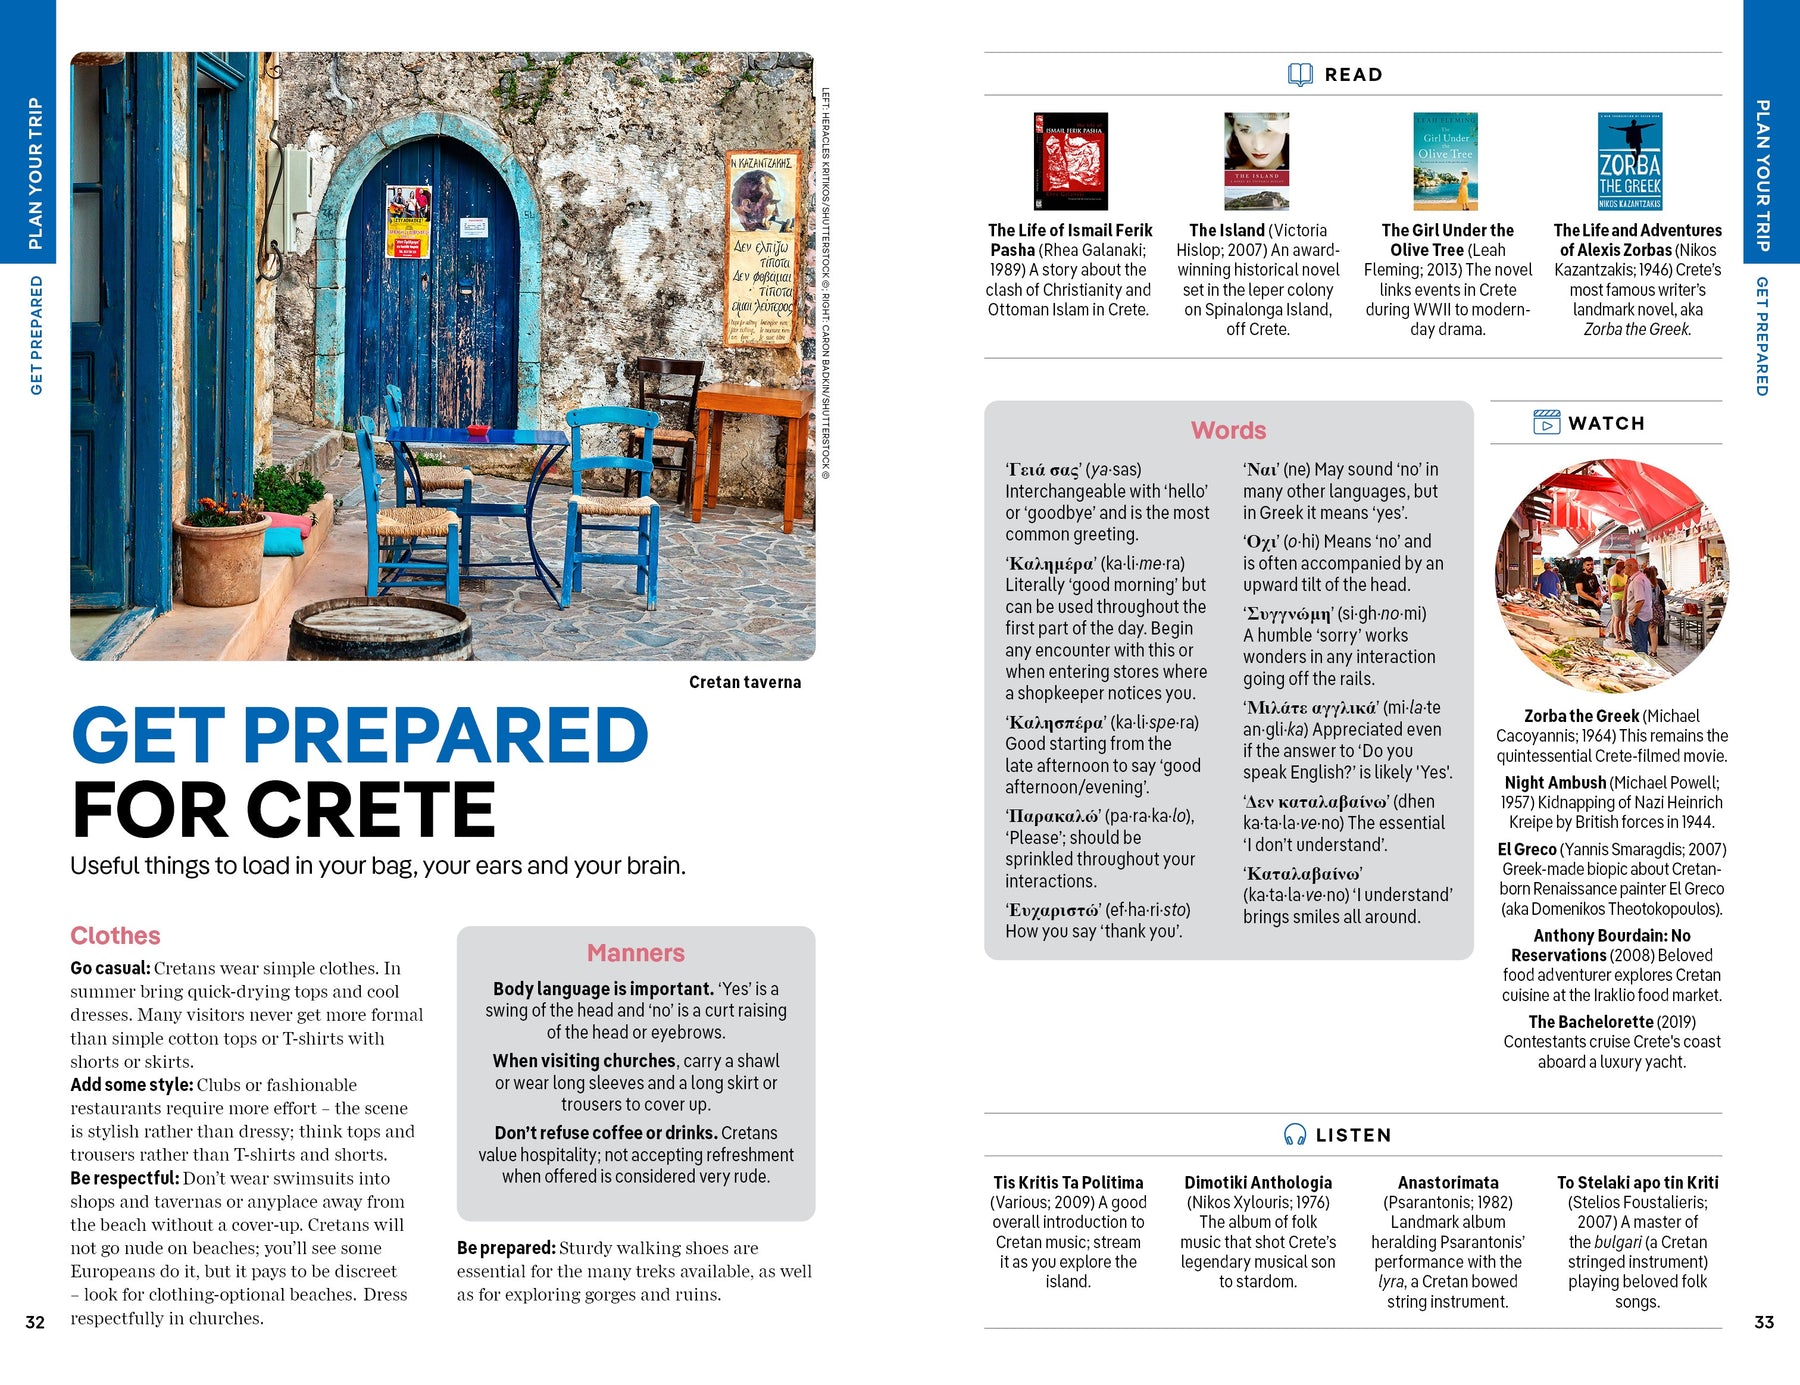 Lonely Planet Crete 8 (Travel Guide)